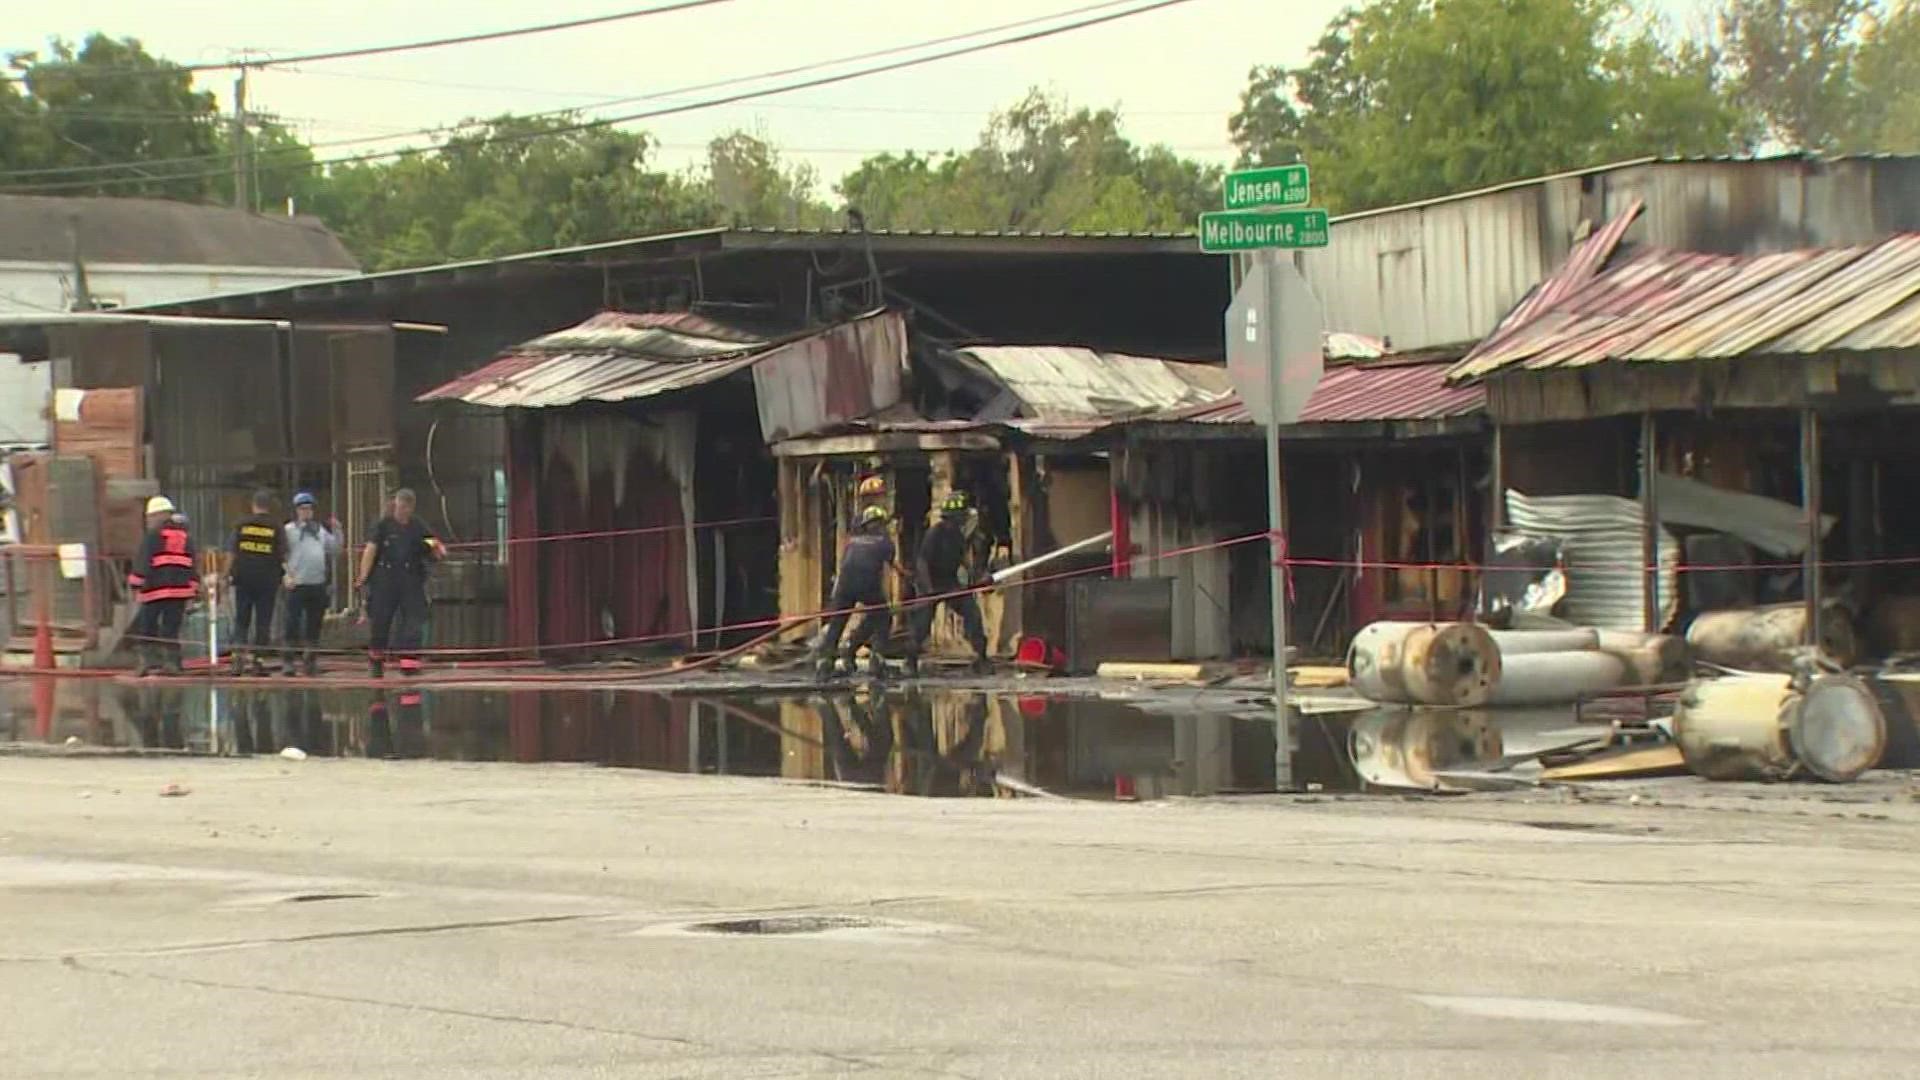 The fire started at Martin's Hardware & Lumber in north Houston around 5:30 a.m. and quickly escalated as lumber and propane tanks burned.